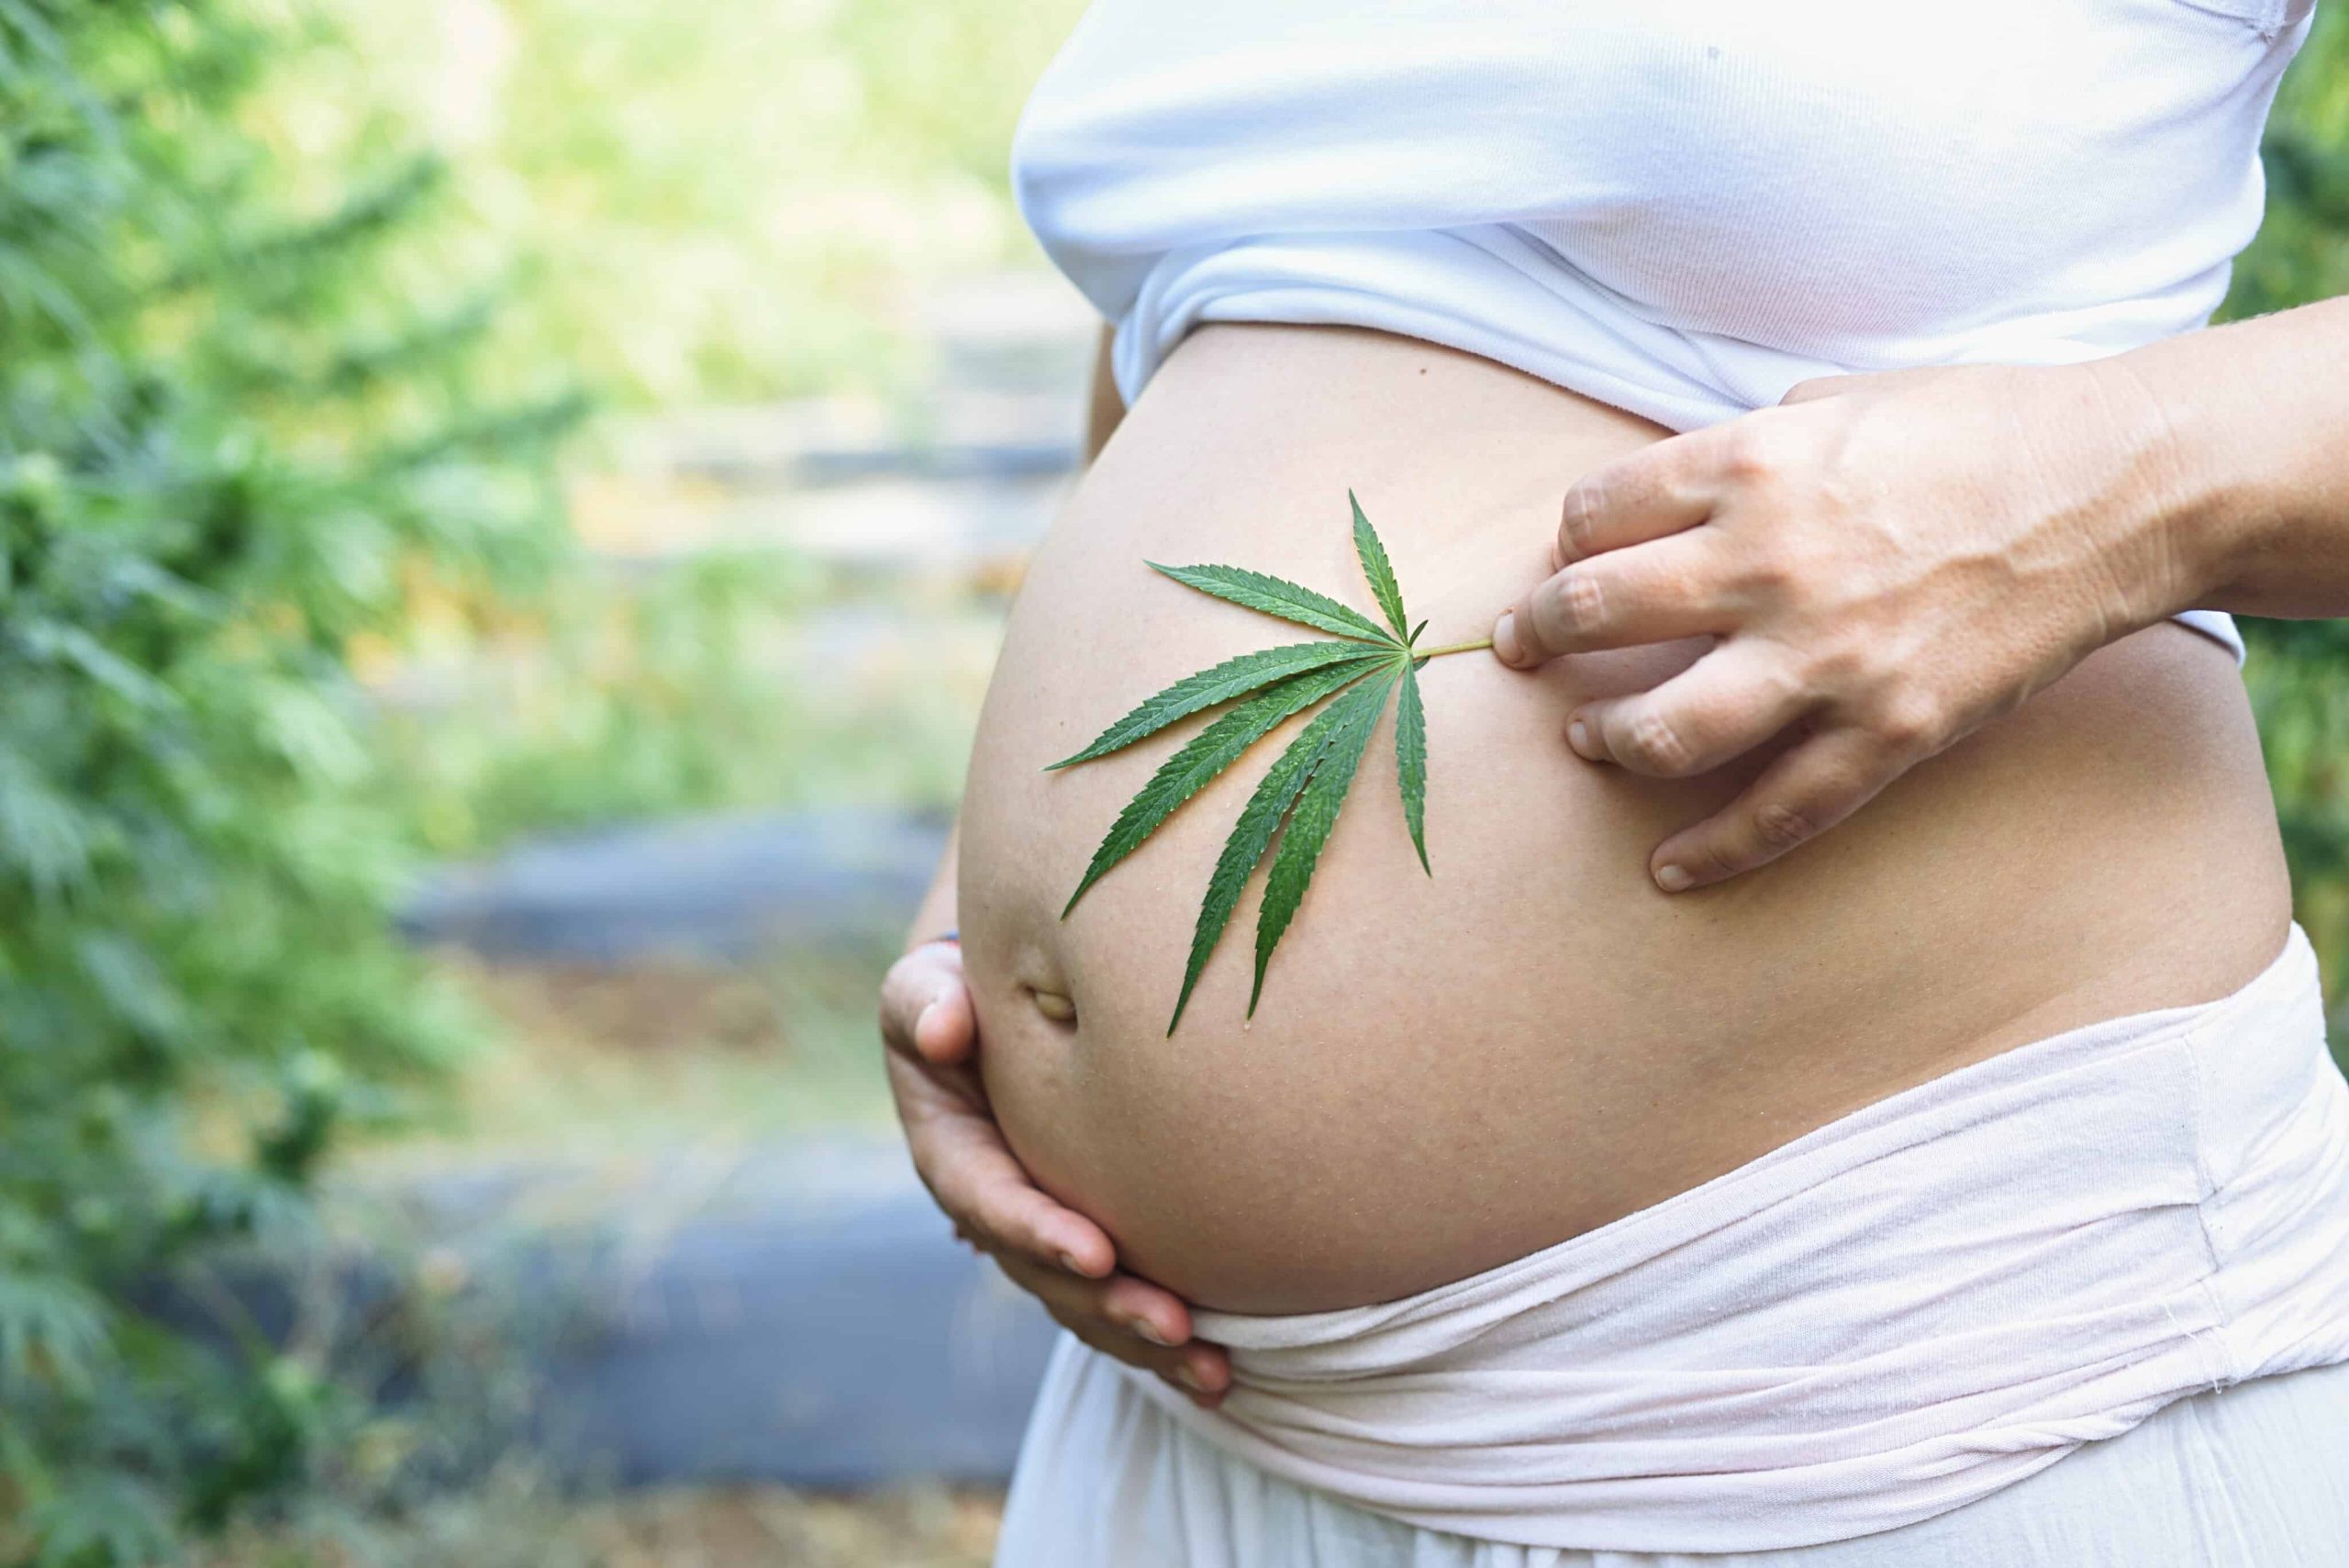 Study: Cannabis Use During Pregnancy May Lead to Low Birth Weight, Preterm Birth